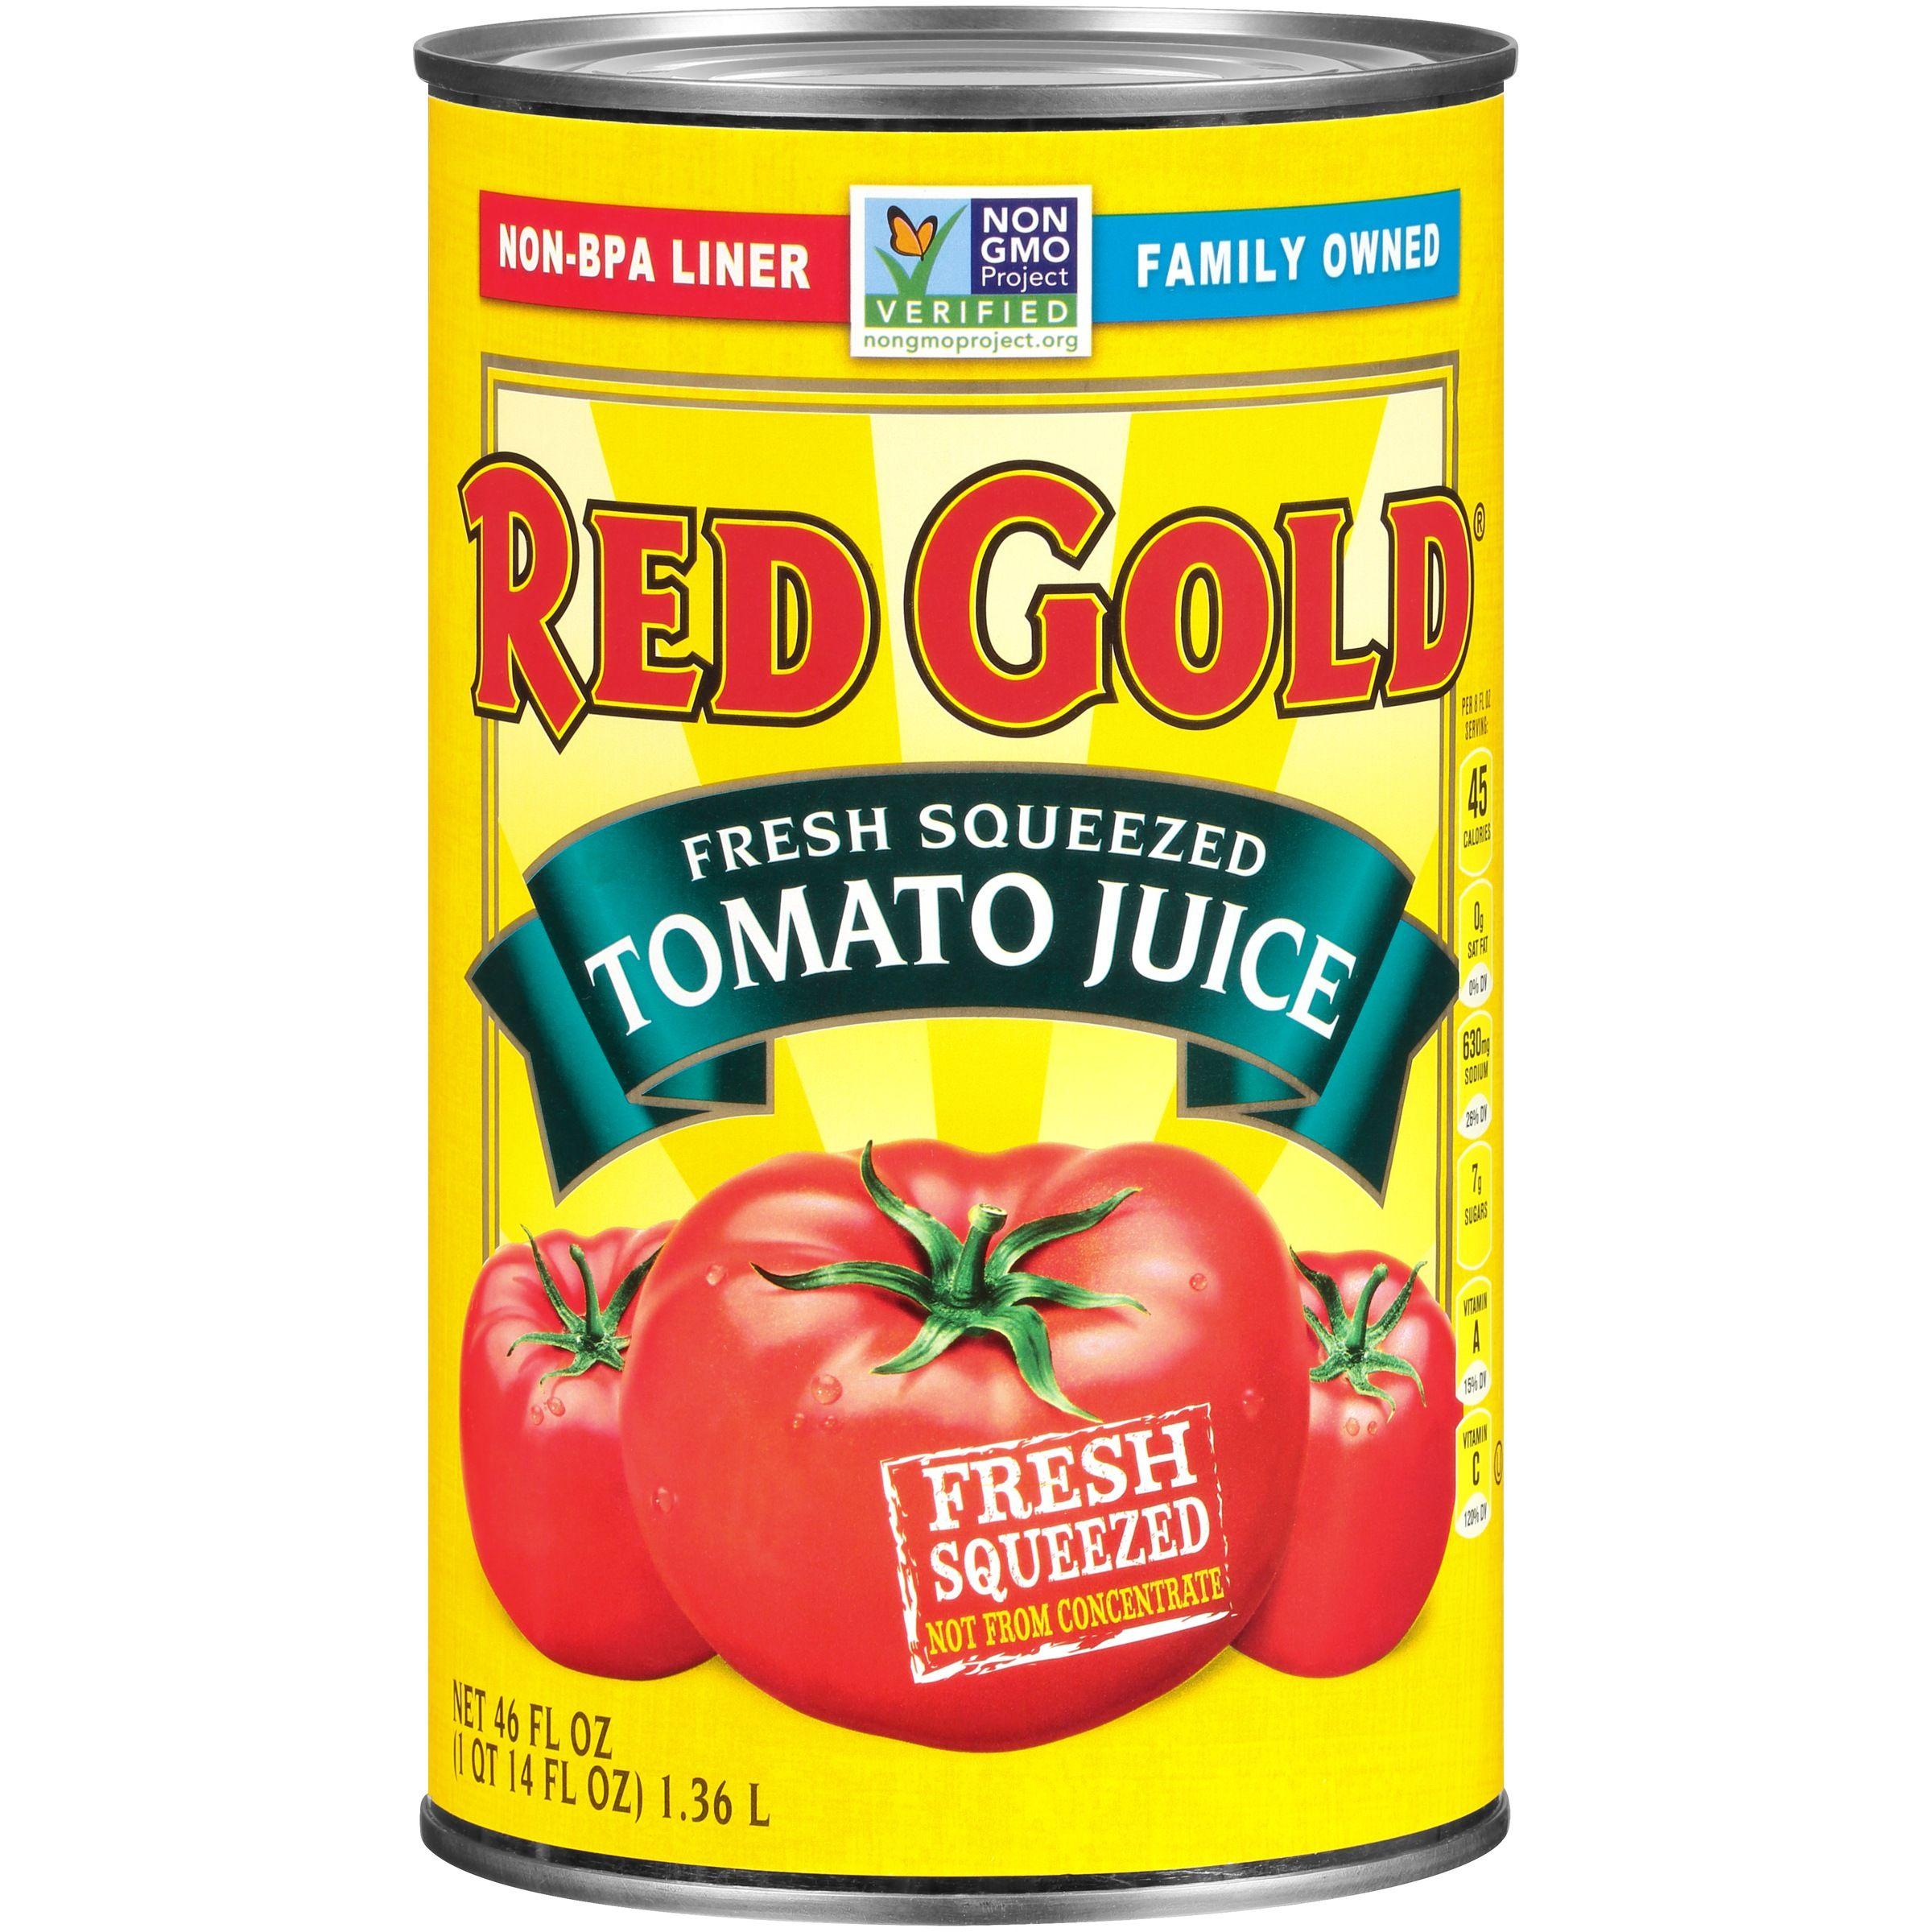 Red Gold Tomatoes Logo - Red GoldÂ® Fresh Squeezed Tomato Juice 46 fl. oz. Can